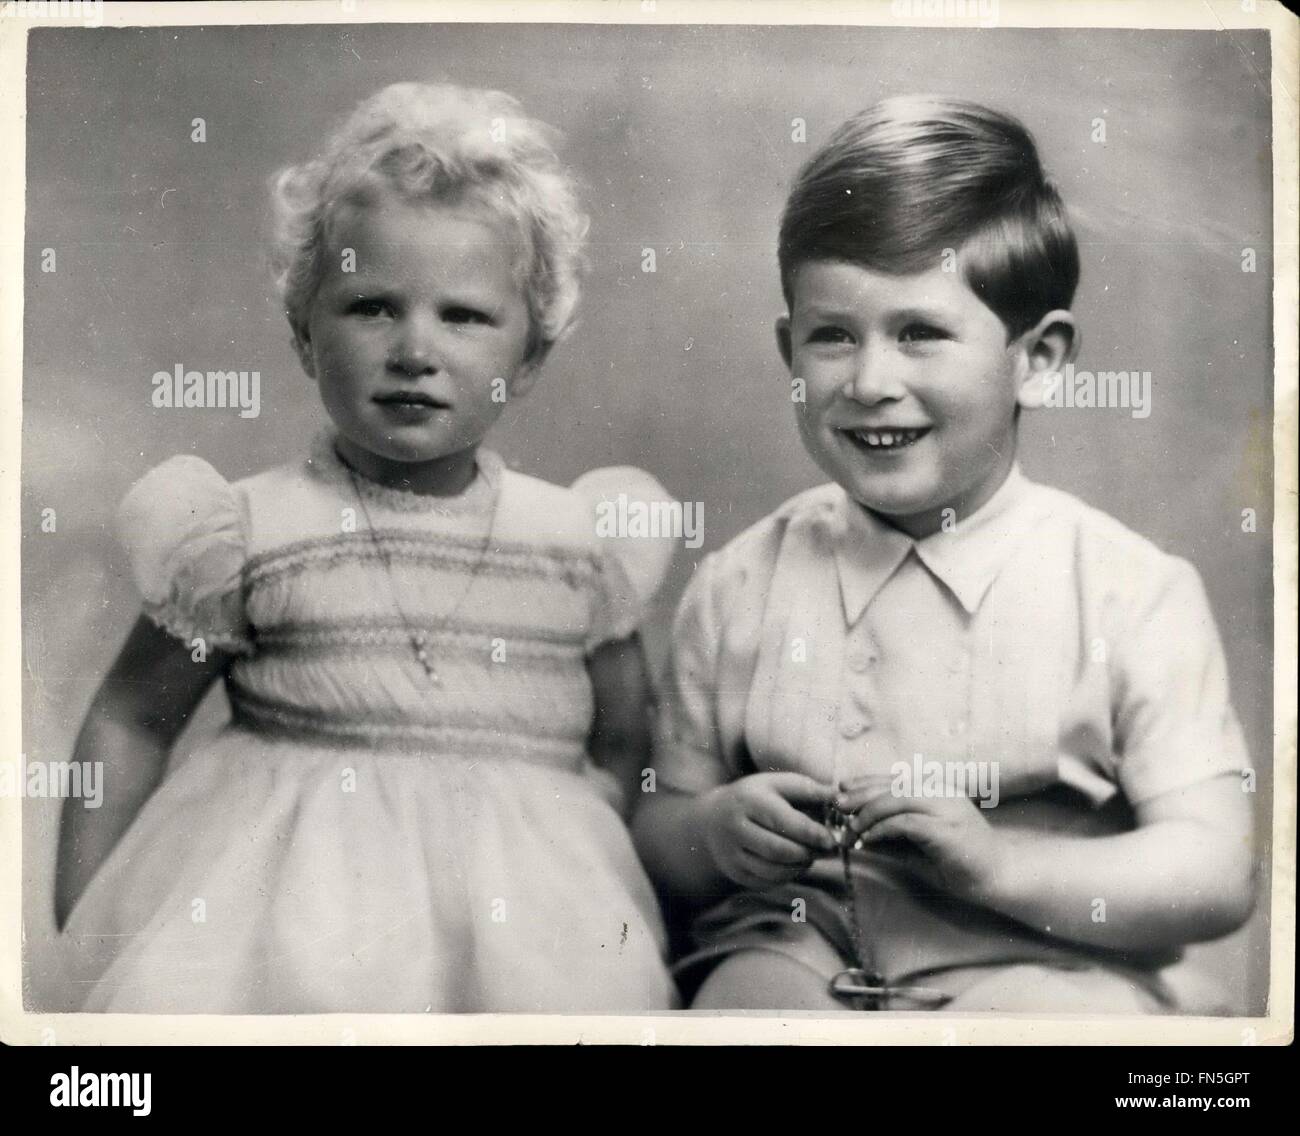 1956 - Prince Charles - Birthday Study With Sister. A new and charming study of Prince Charles and his two-year old sister, Princess Anne. Prince Charles, who is four years old today (November 14th) - holds the crystal watch which has figured in many Royal photographs. © Keystone Pictures USA/ZUMAPRESS.com/Alamy Live News Stock Photo